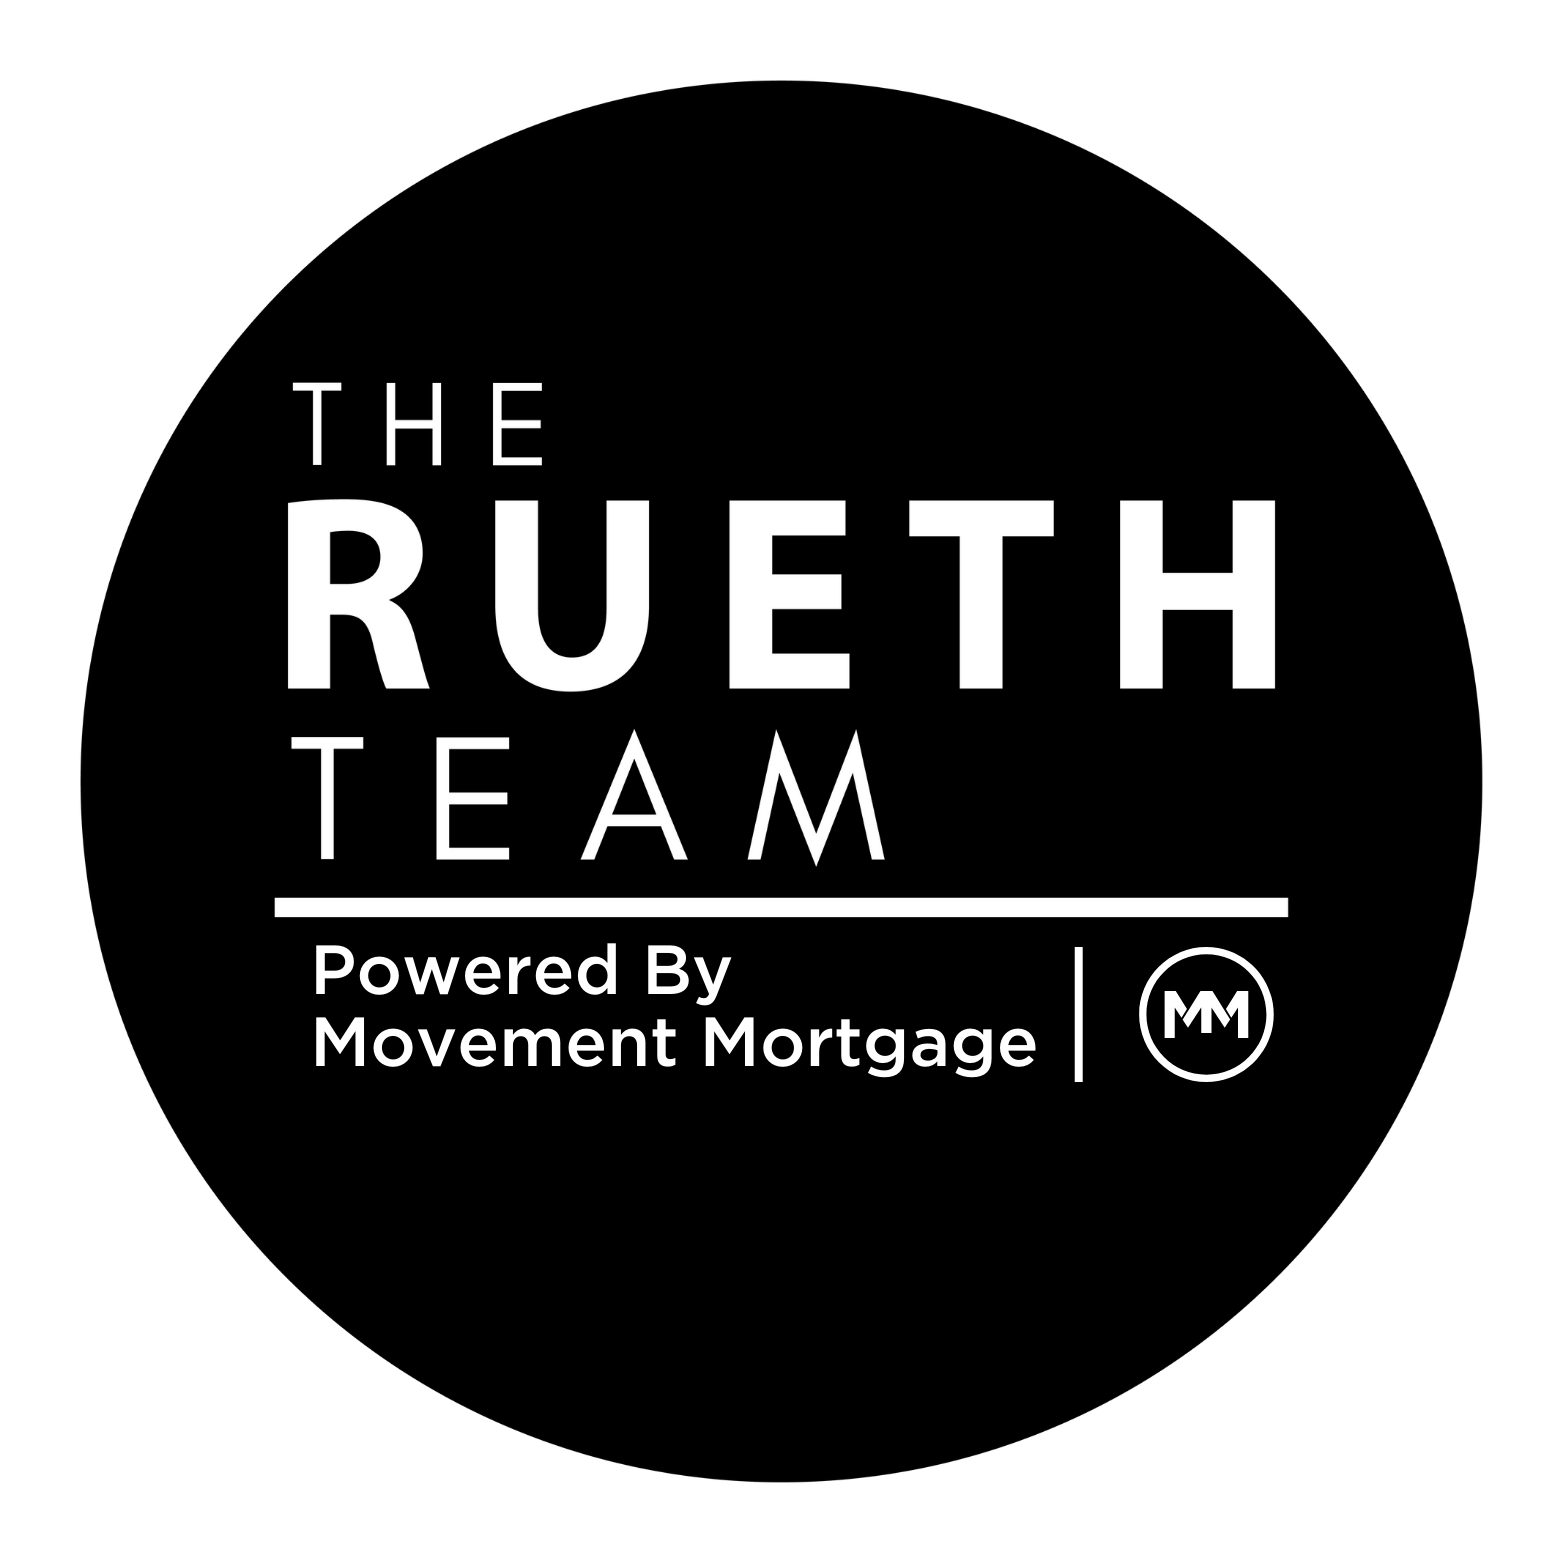 The Rueth Team with Movement Mortgage